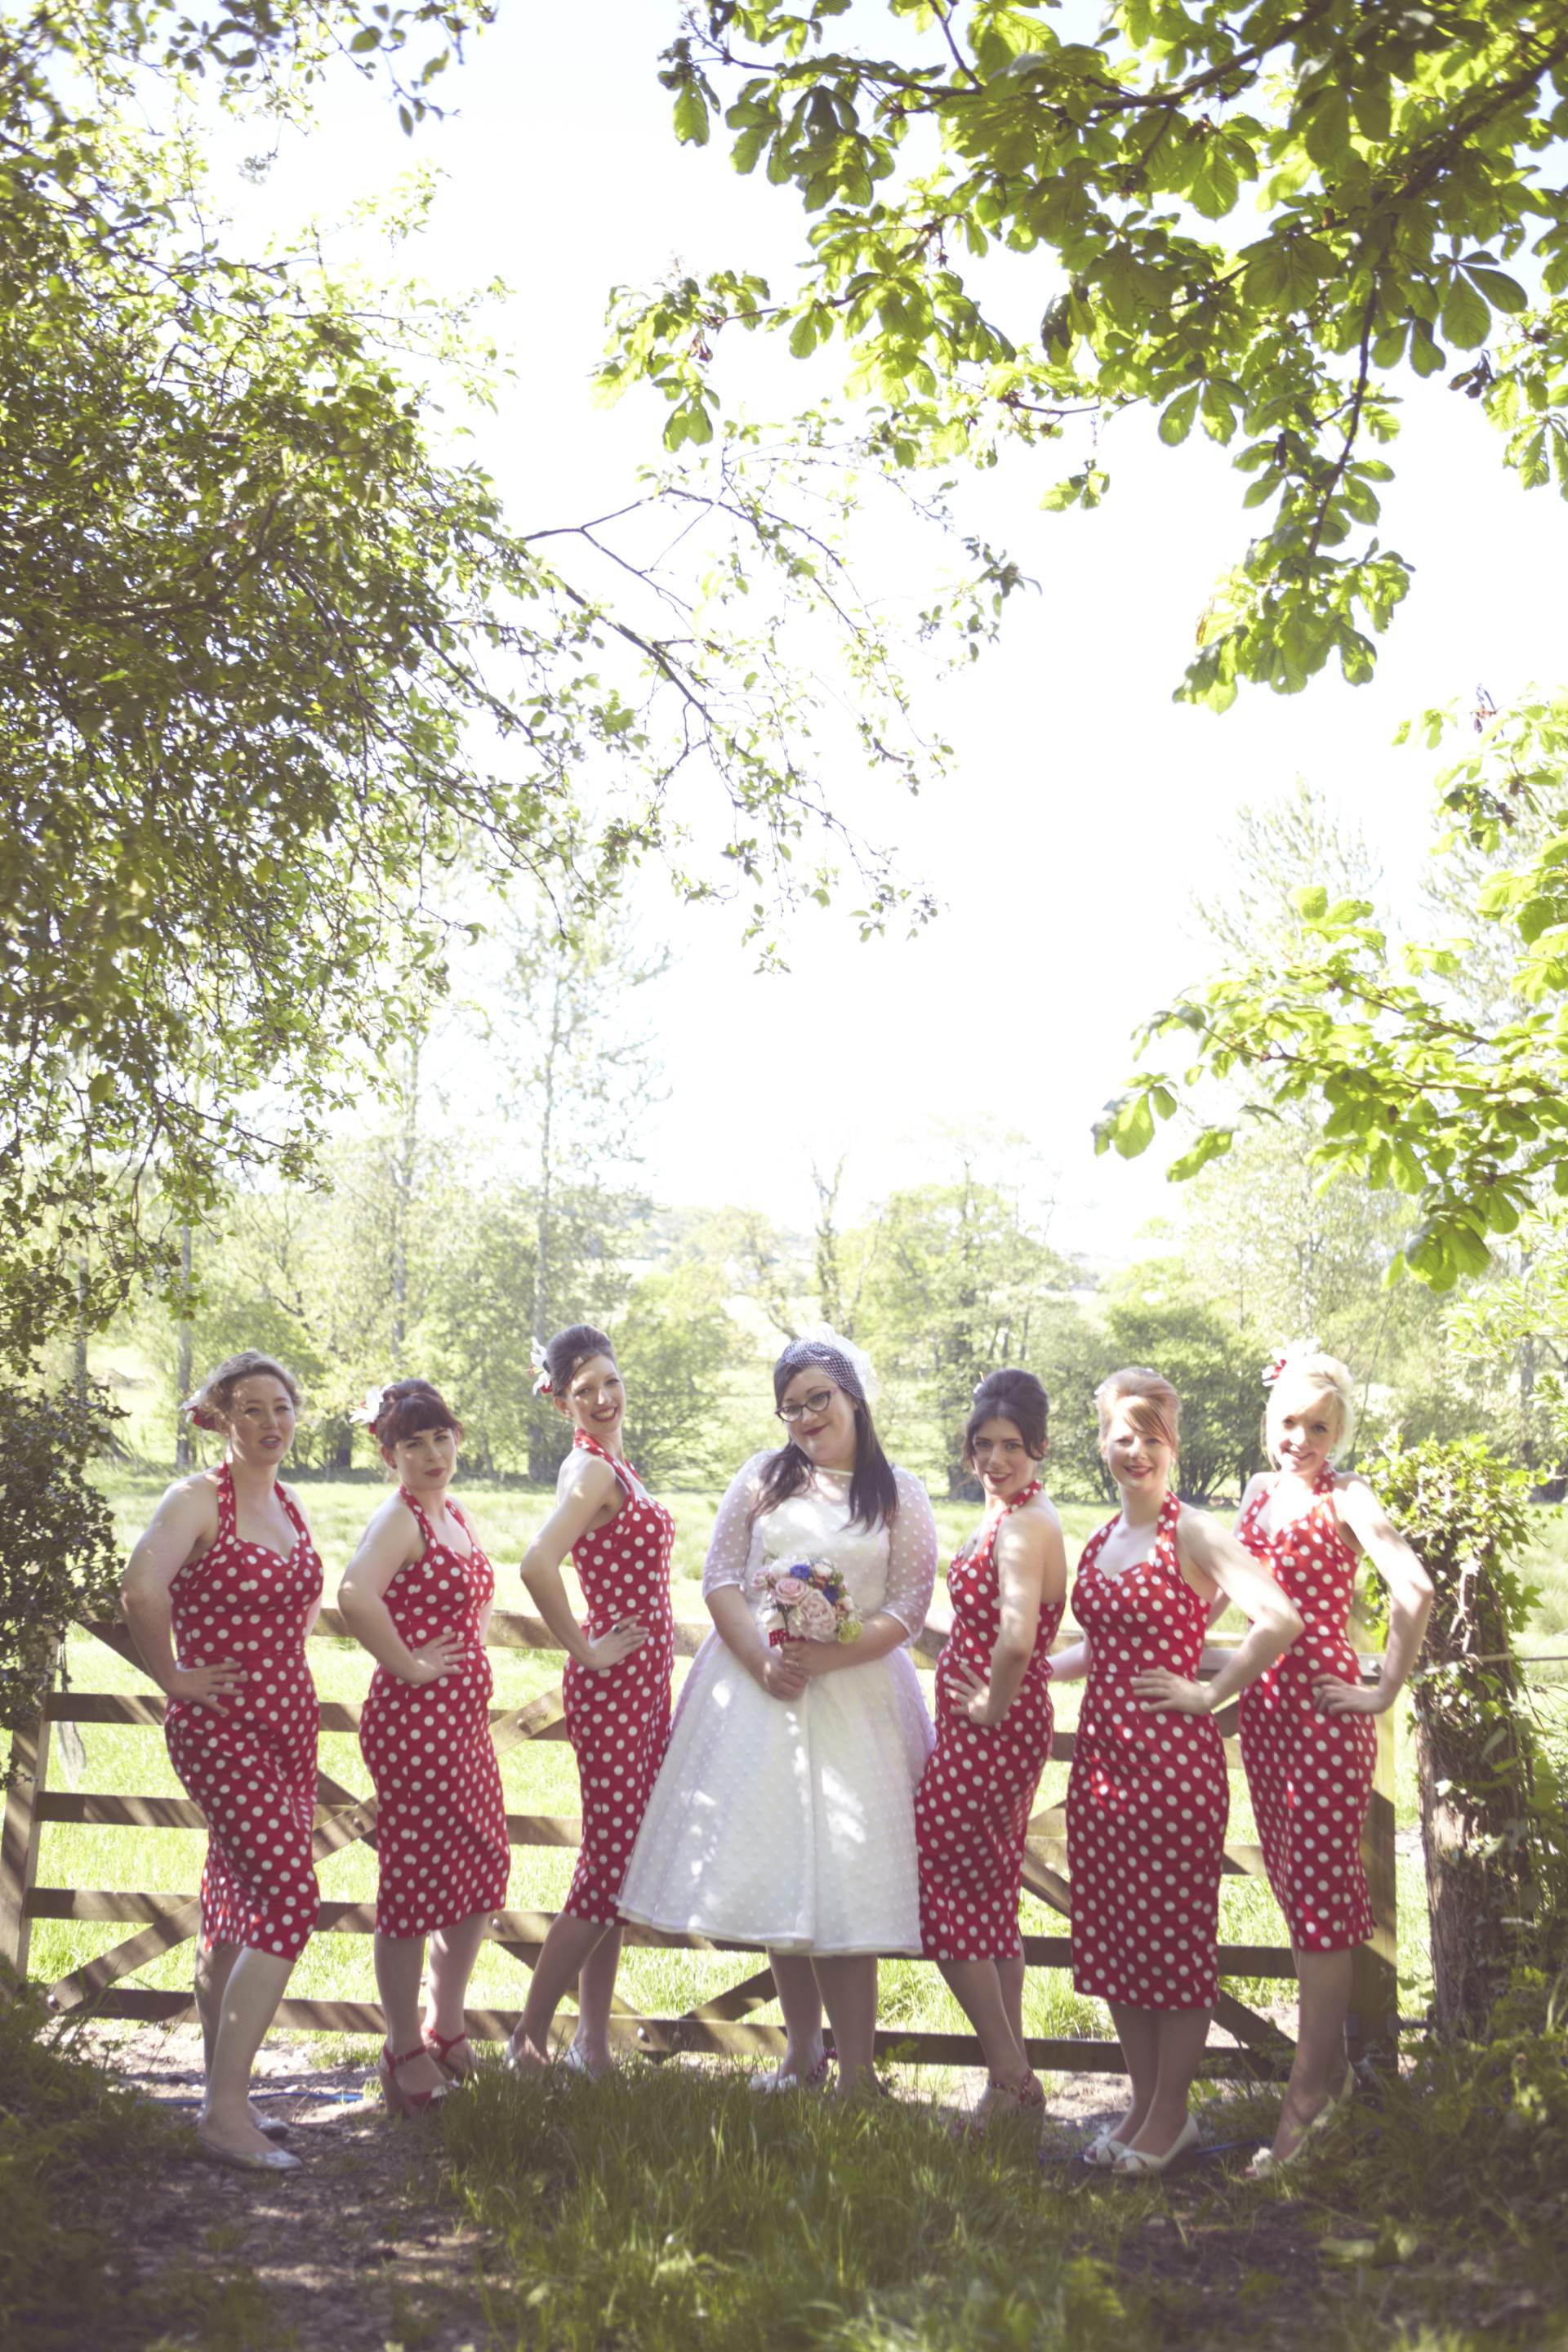 Dan and Maddi's Vintage Americana Country Wedding by Natalie J Weddings and featured on The National Vintage Wedding Fair 